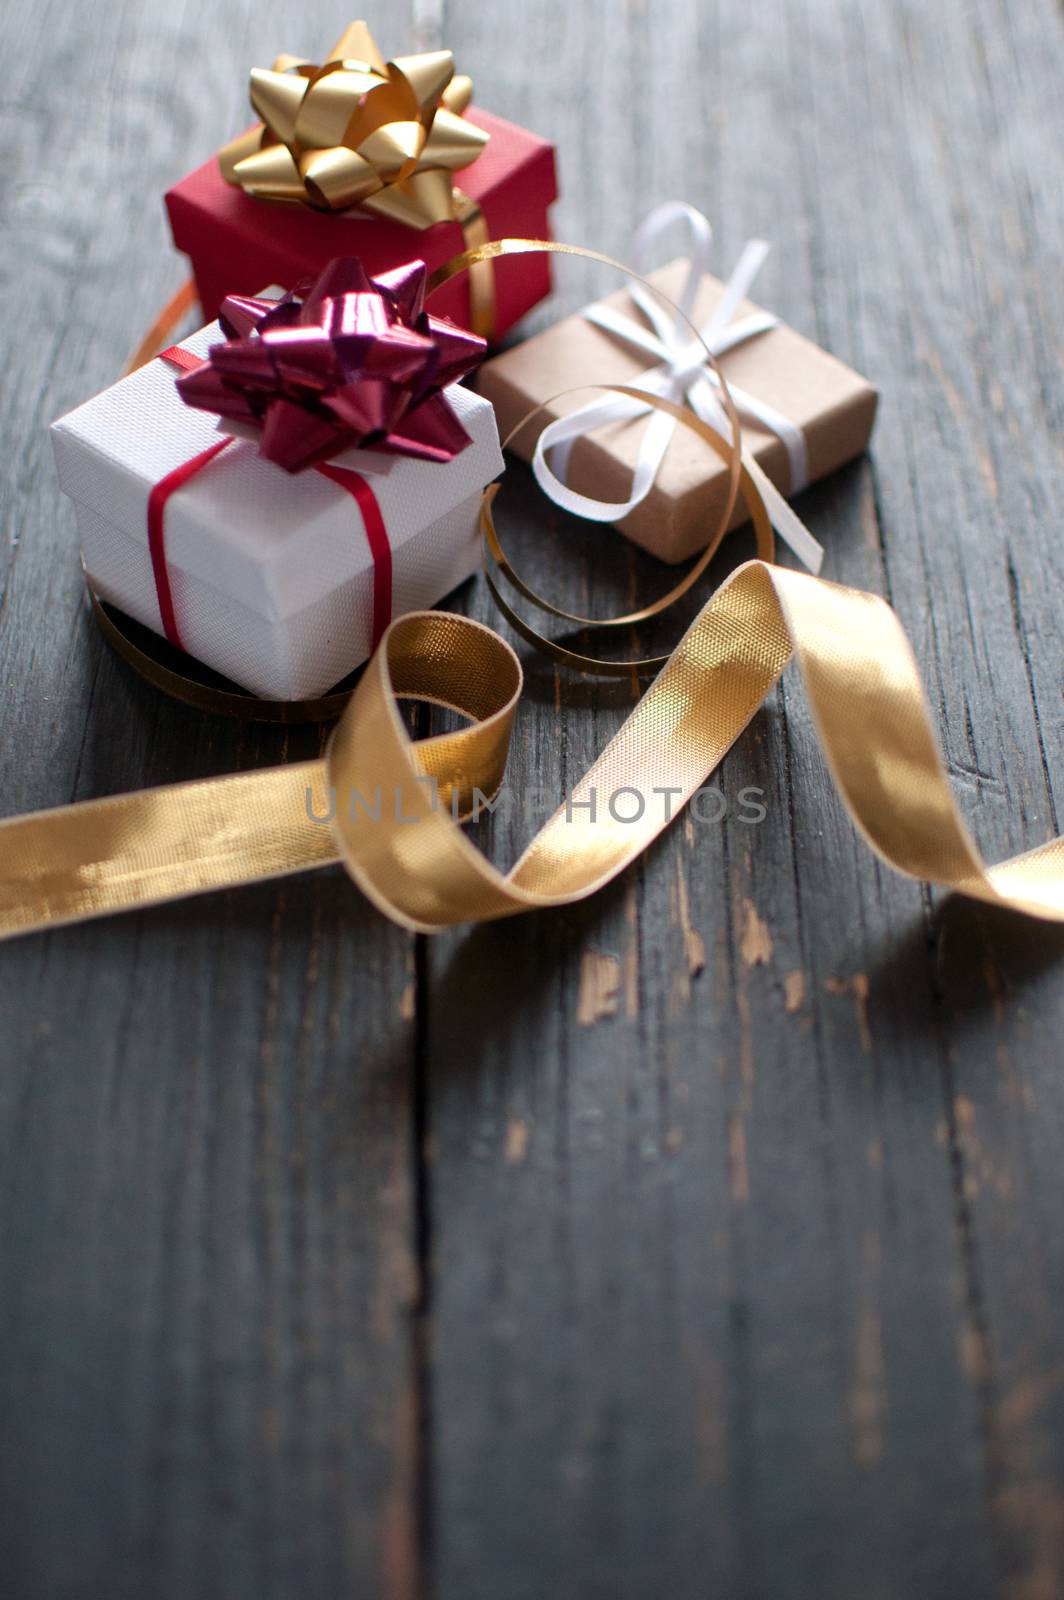 Christmas gift boxes wrapped with ribbon over a wooden background